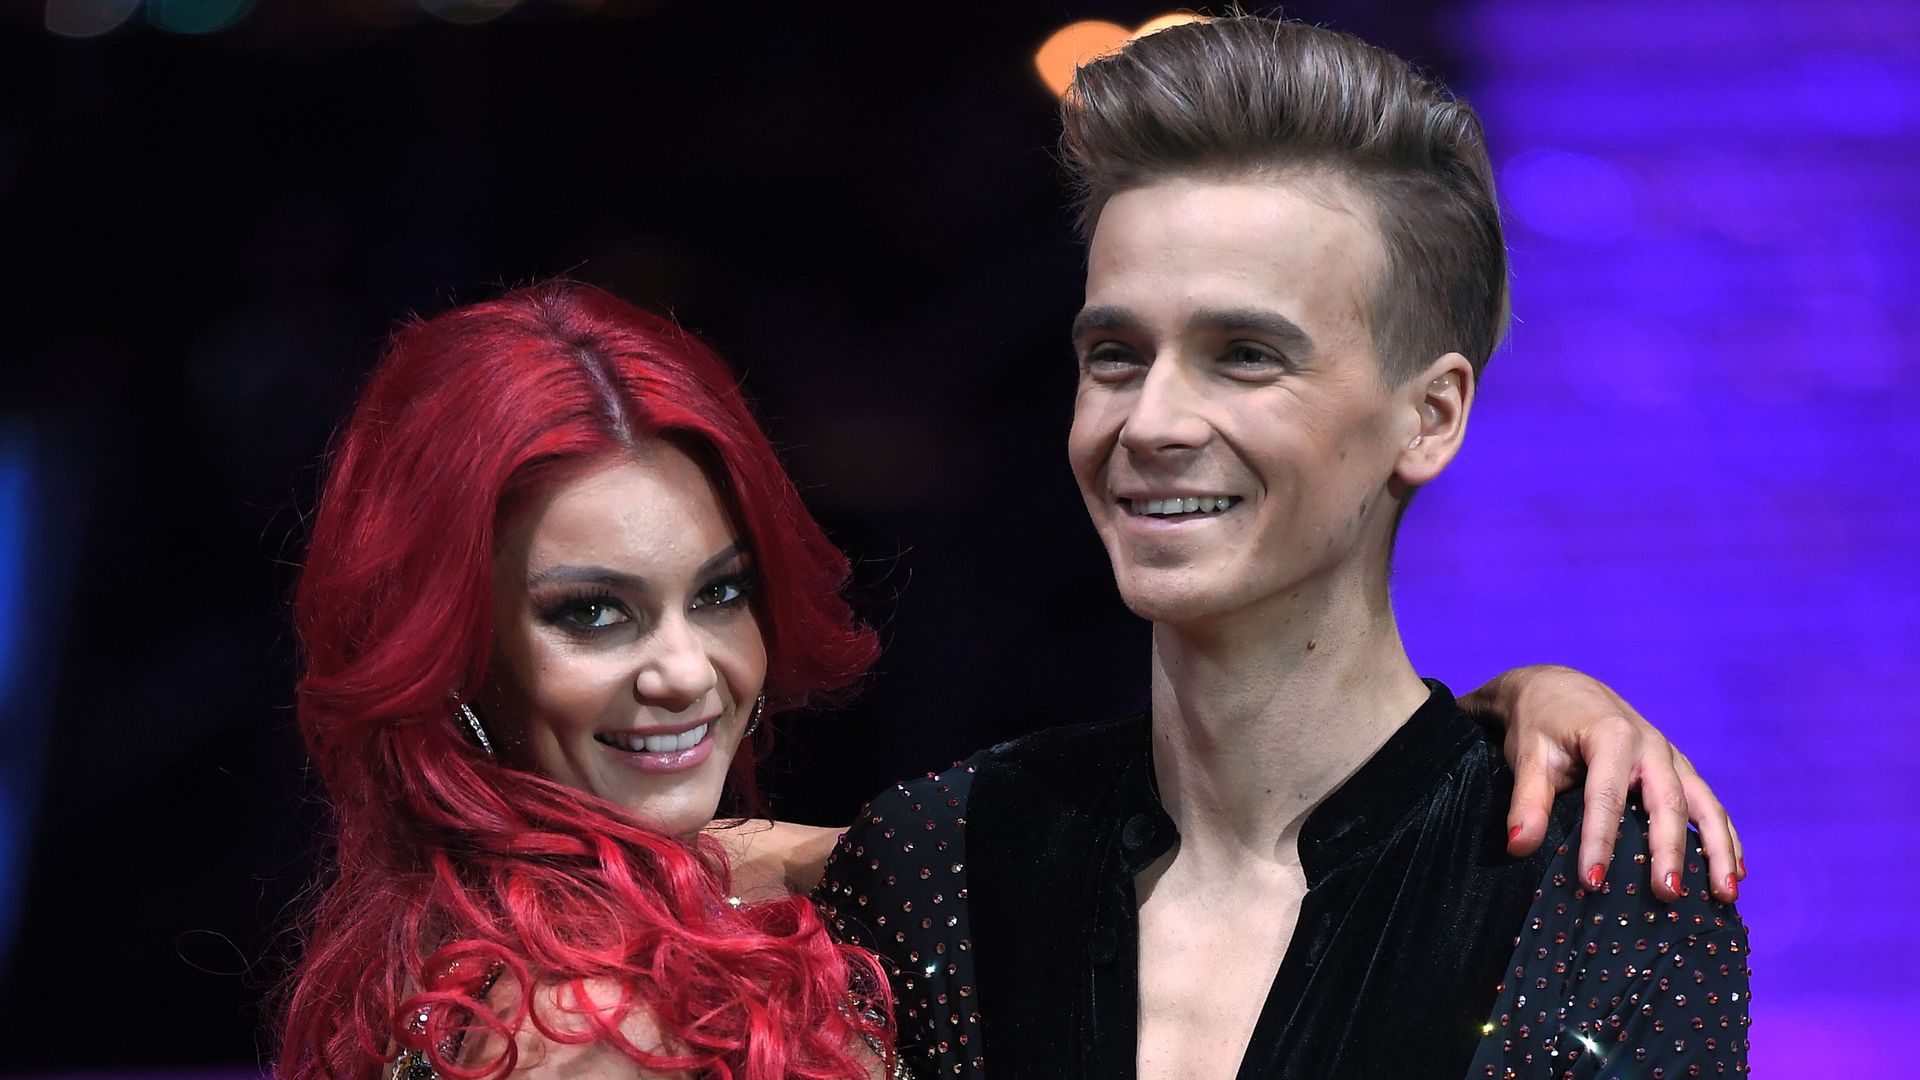 Dianne Buswell with her leg being held by Joe Sugg